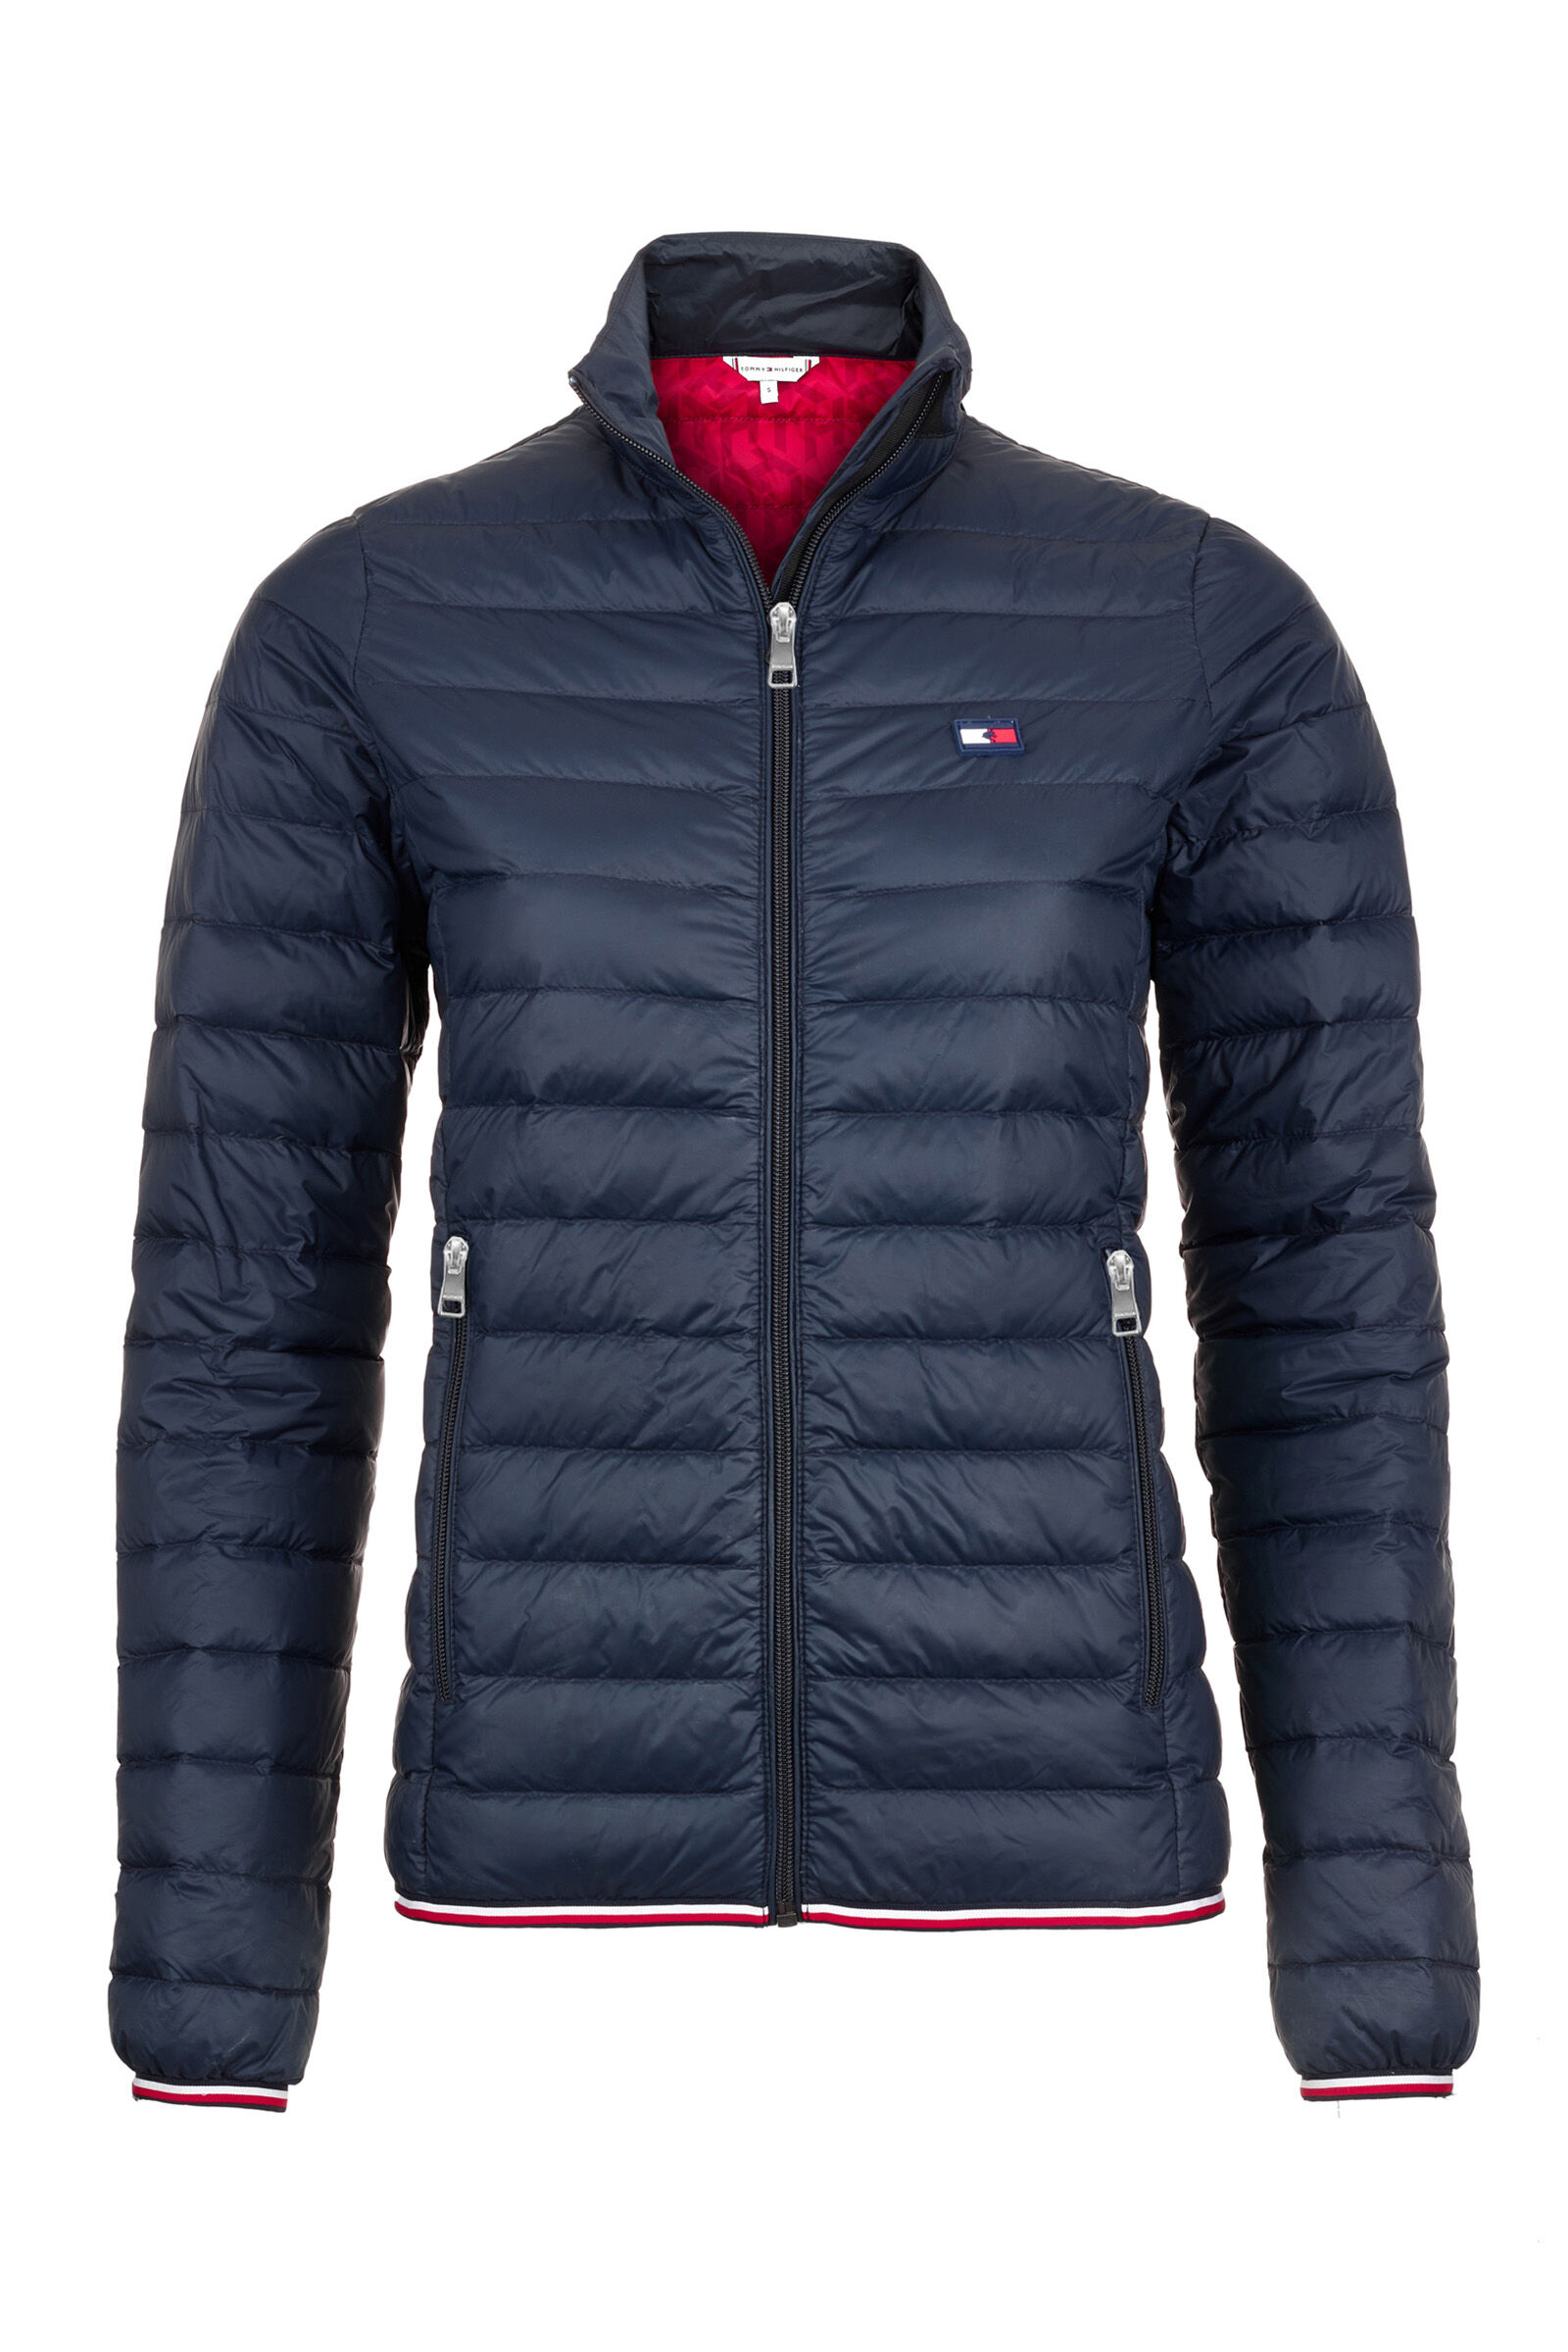 New York THProtect Puffer Jacket | Tommy Hilfiger USA